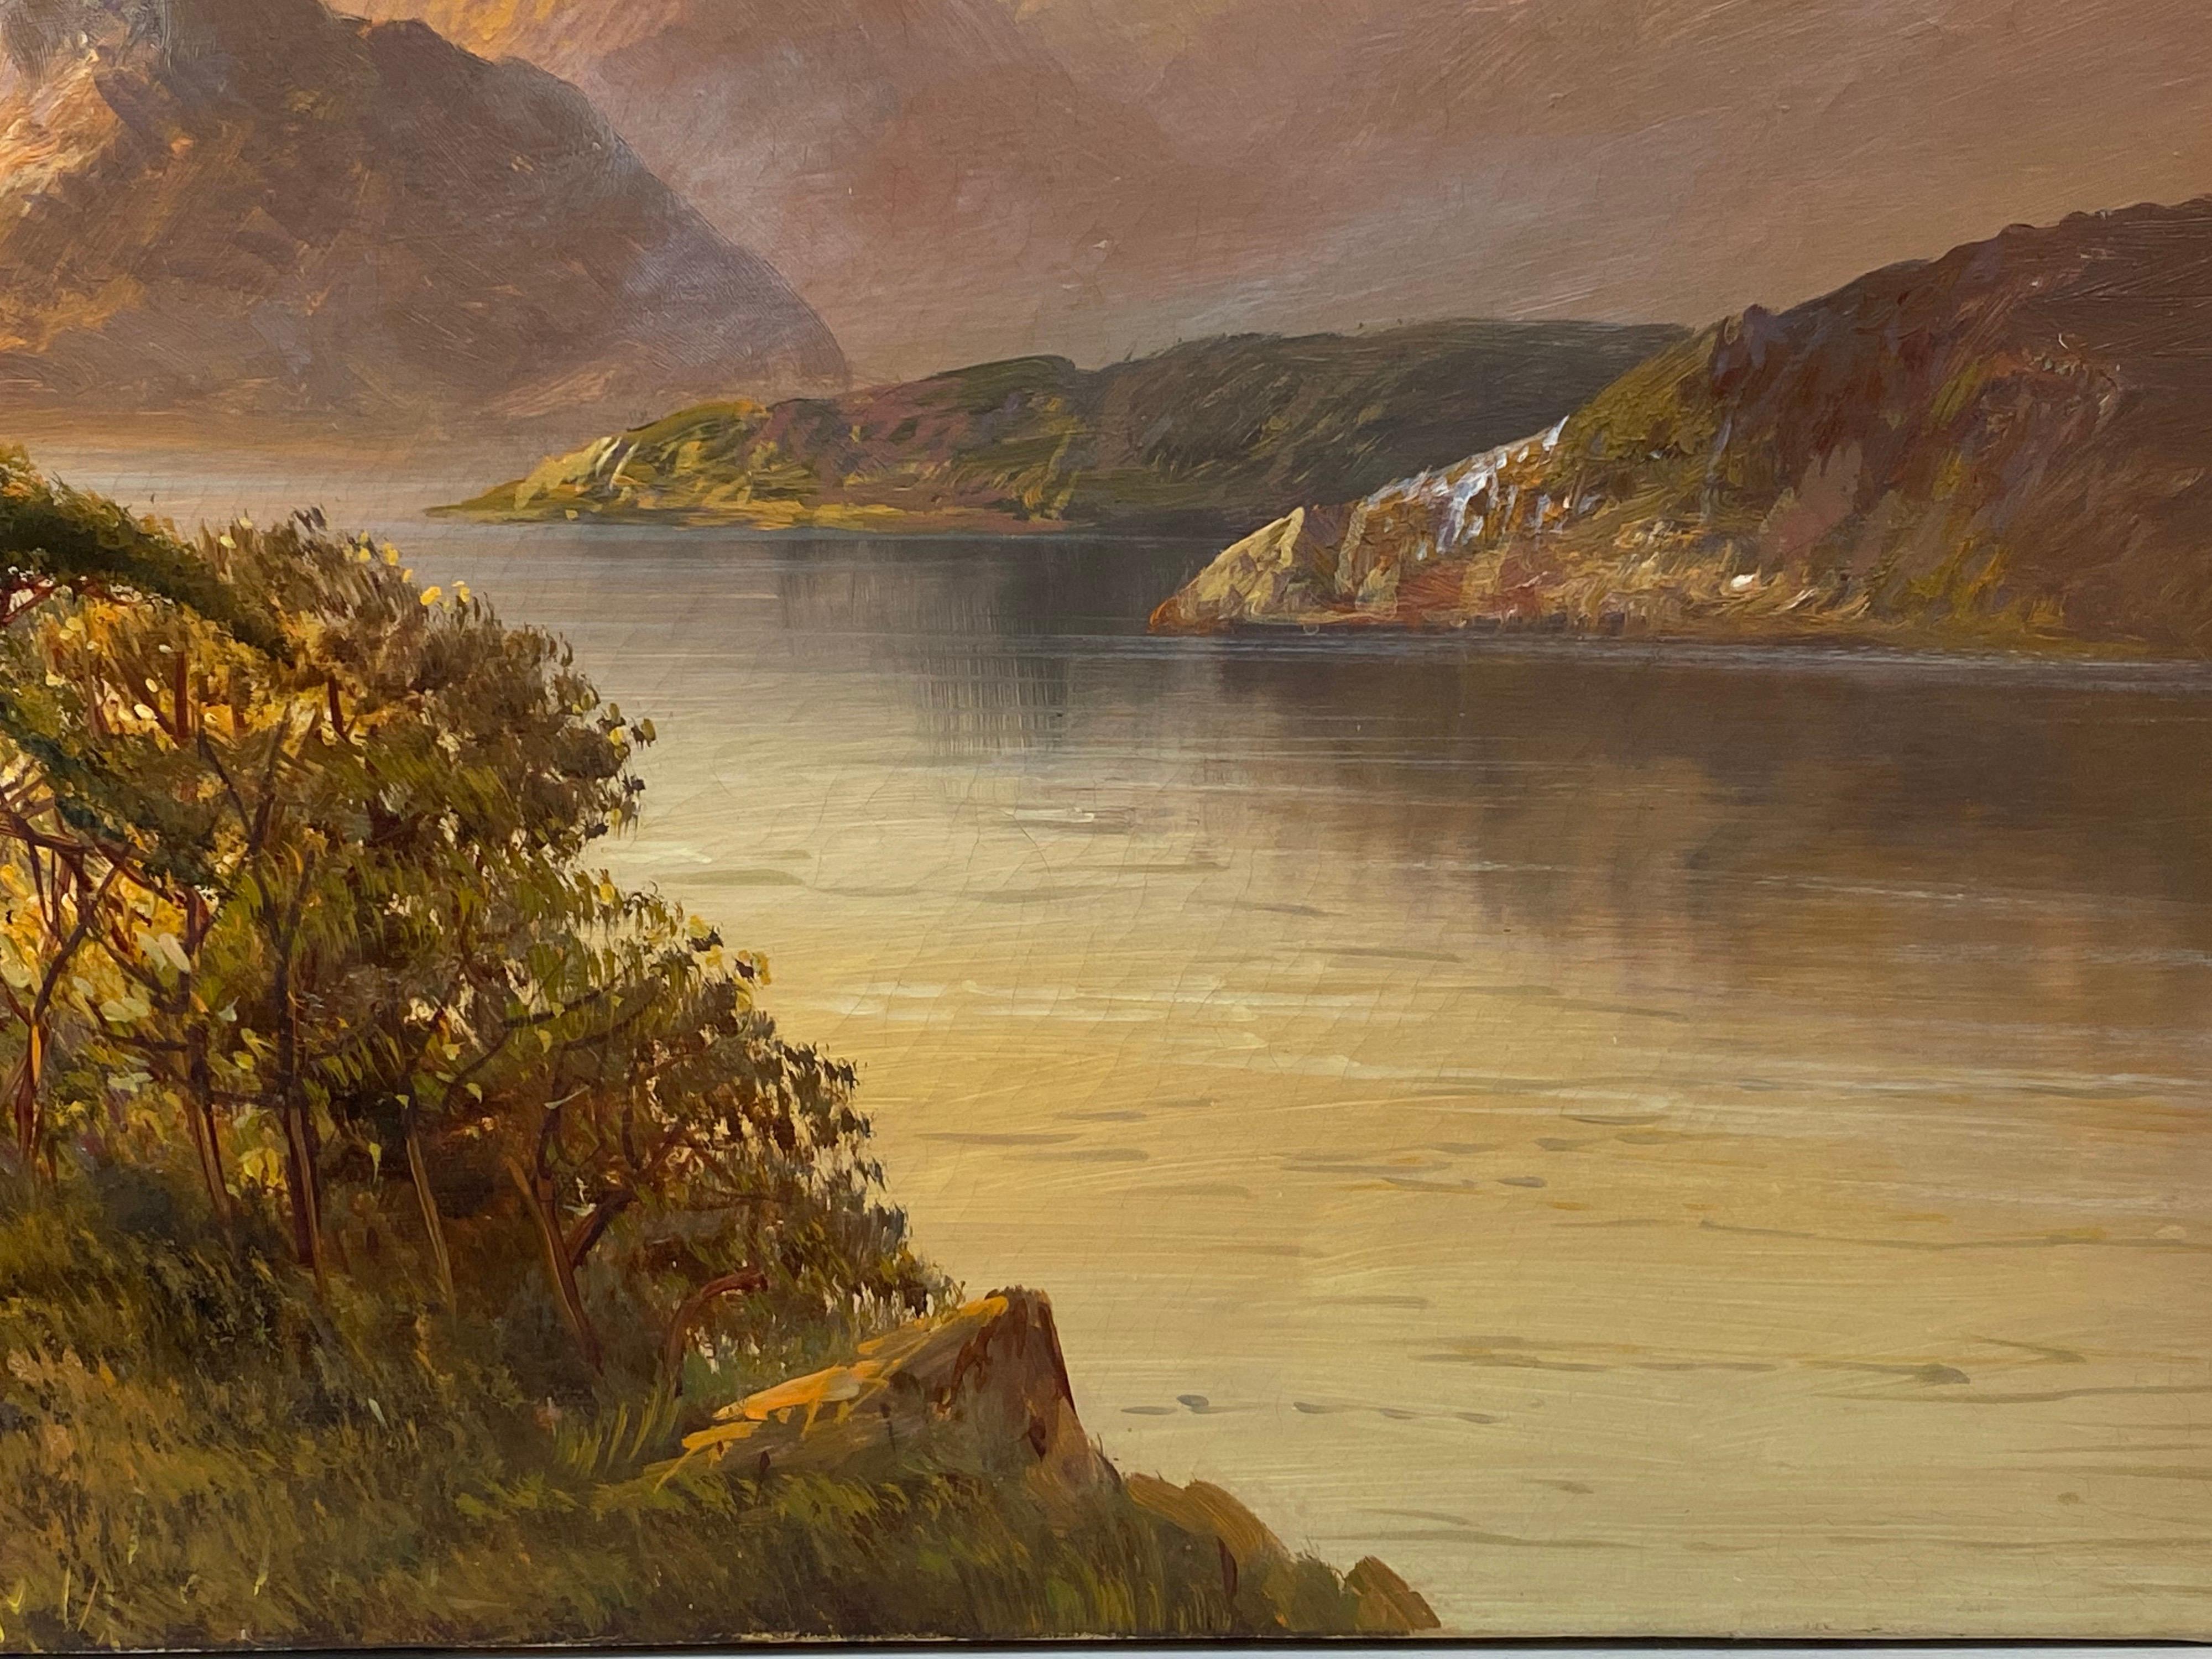 Antique Scottish Highlands Oil Painting Sunset Extensive Loch Landscape Scene - Brown Figurative Painting by Francis E. Jamieson